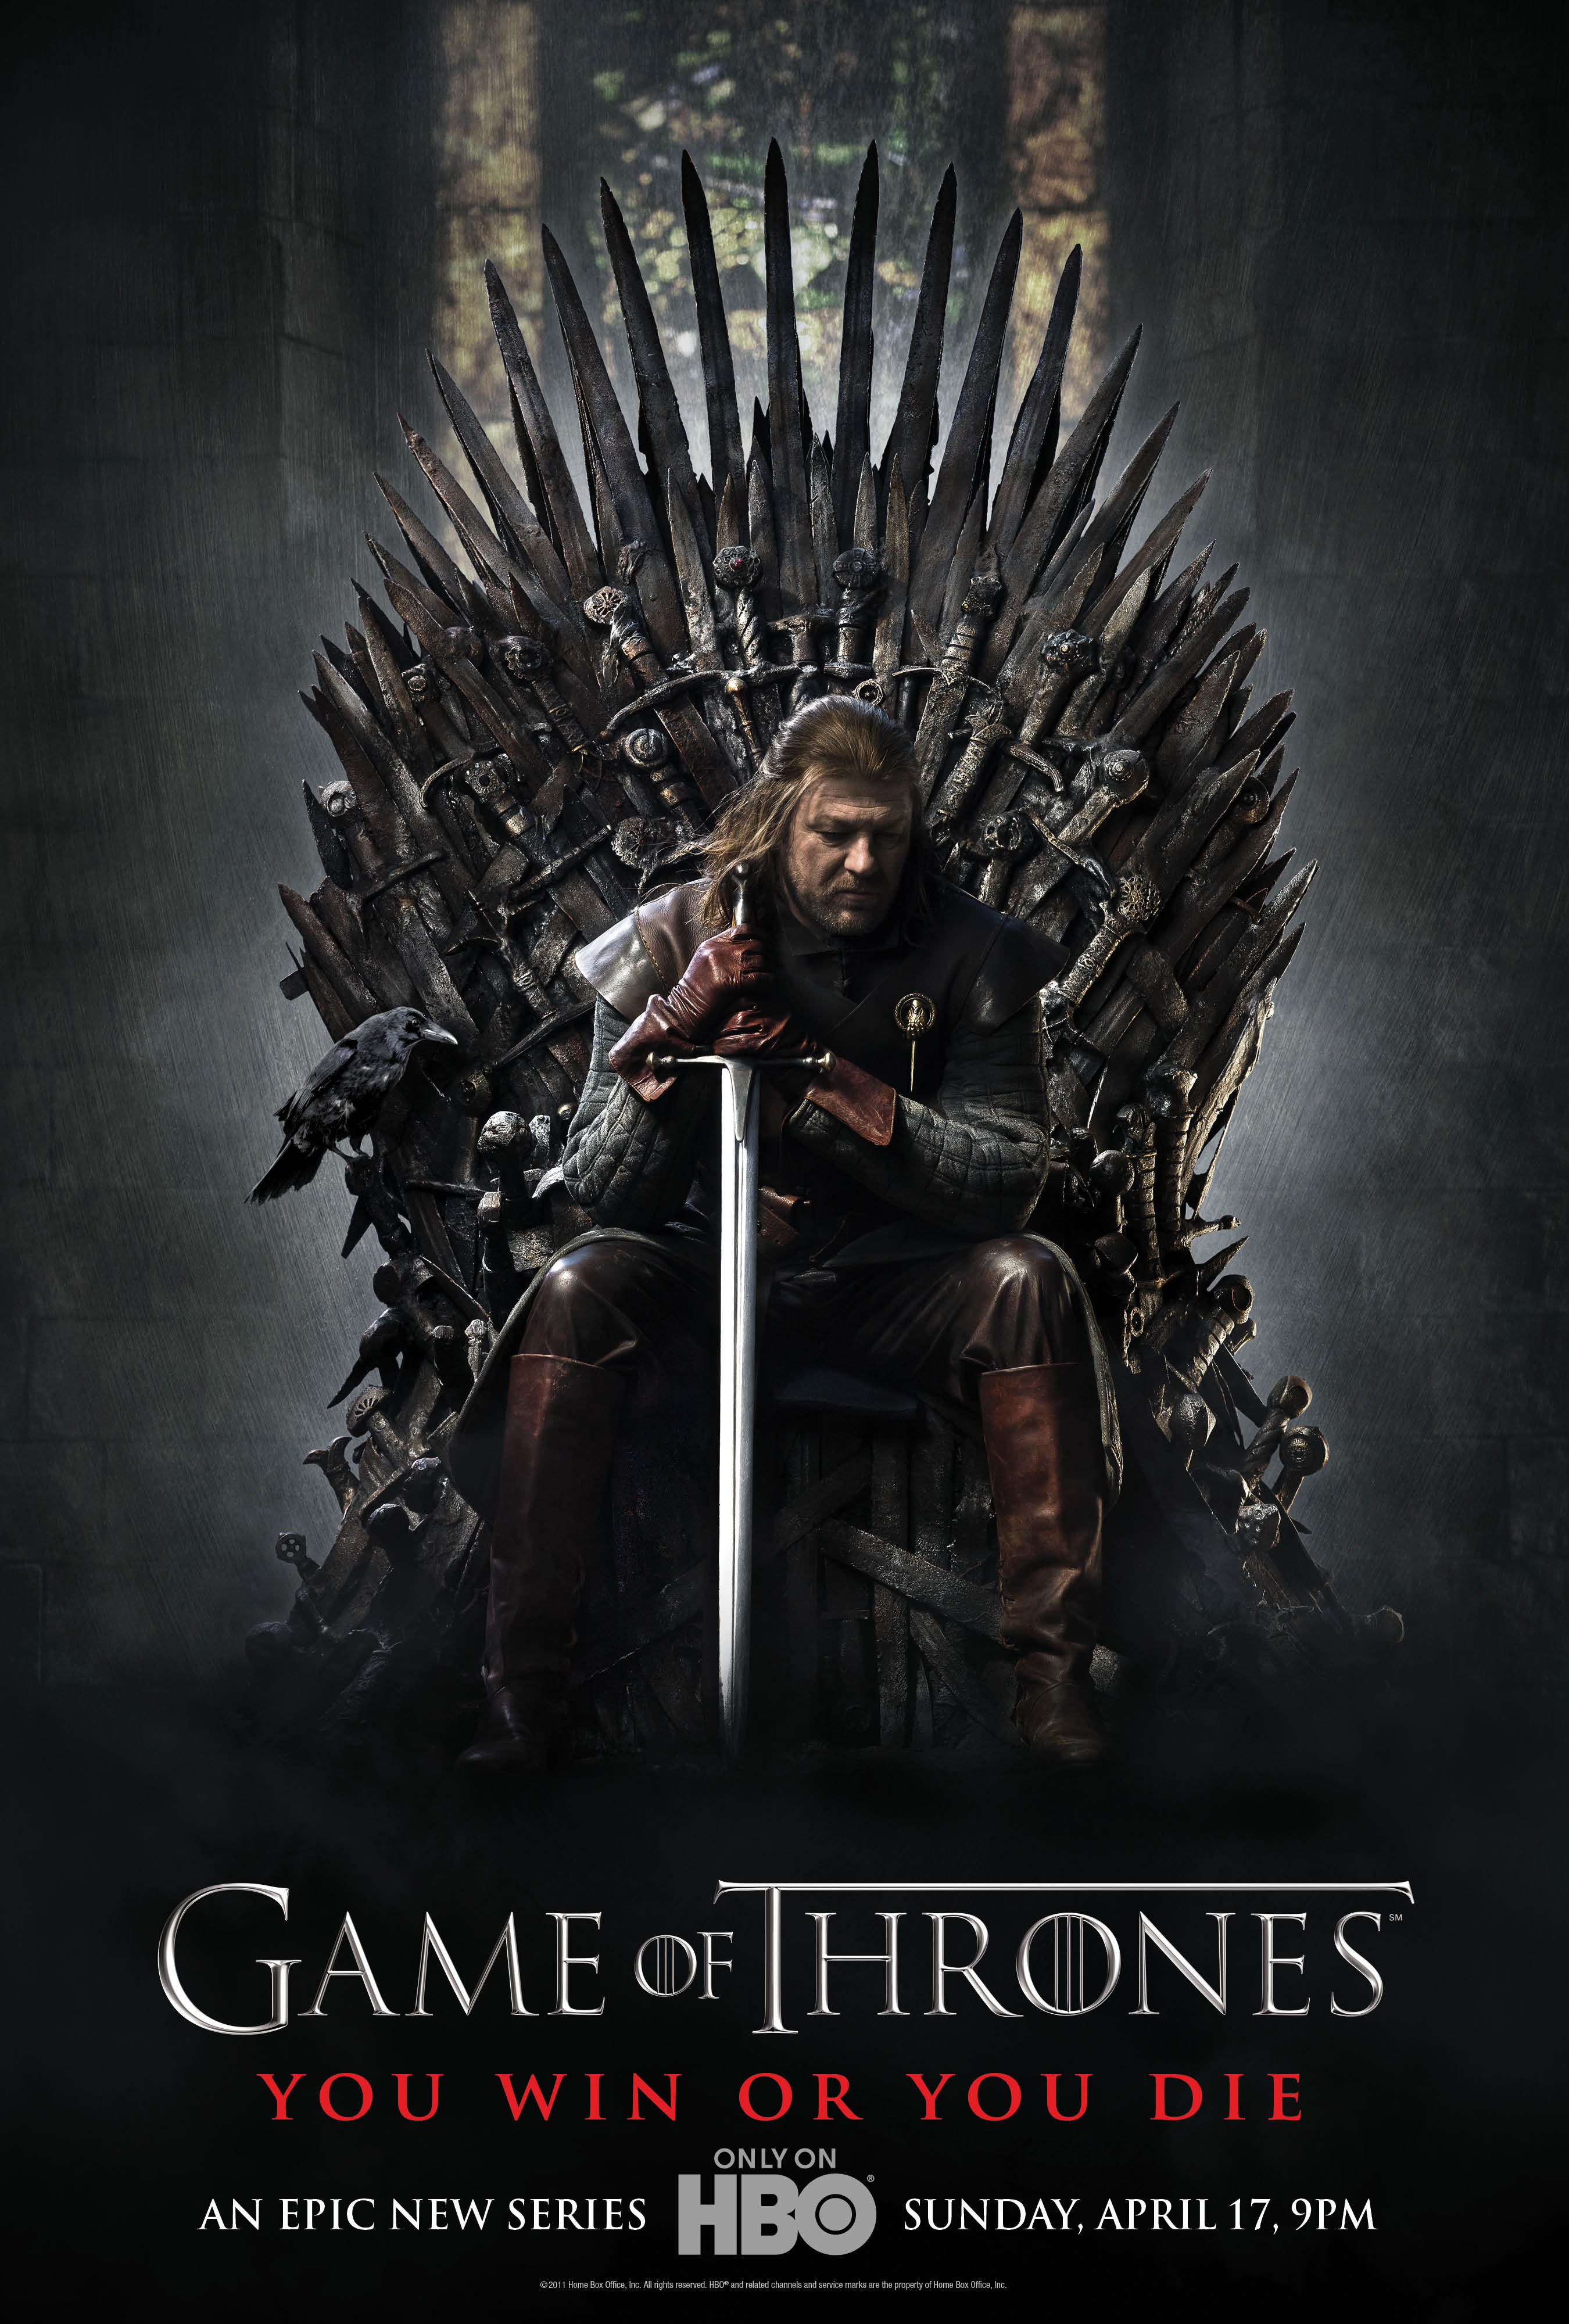 Game of Thrones Poster.jpeg